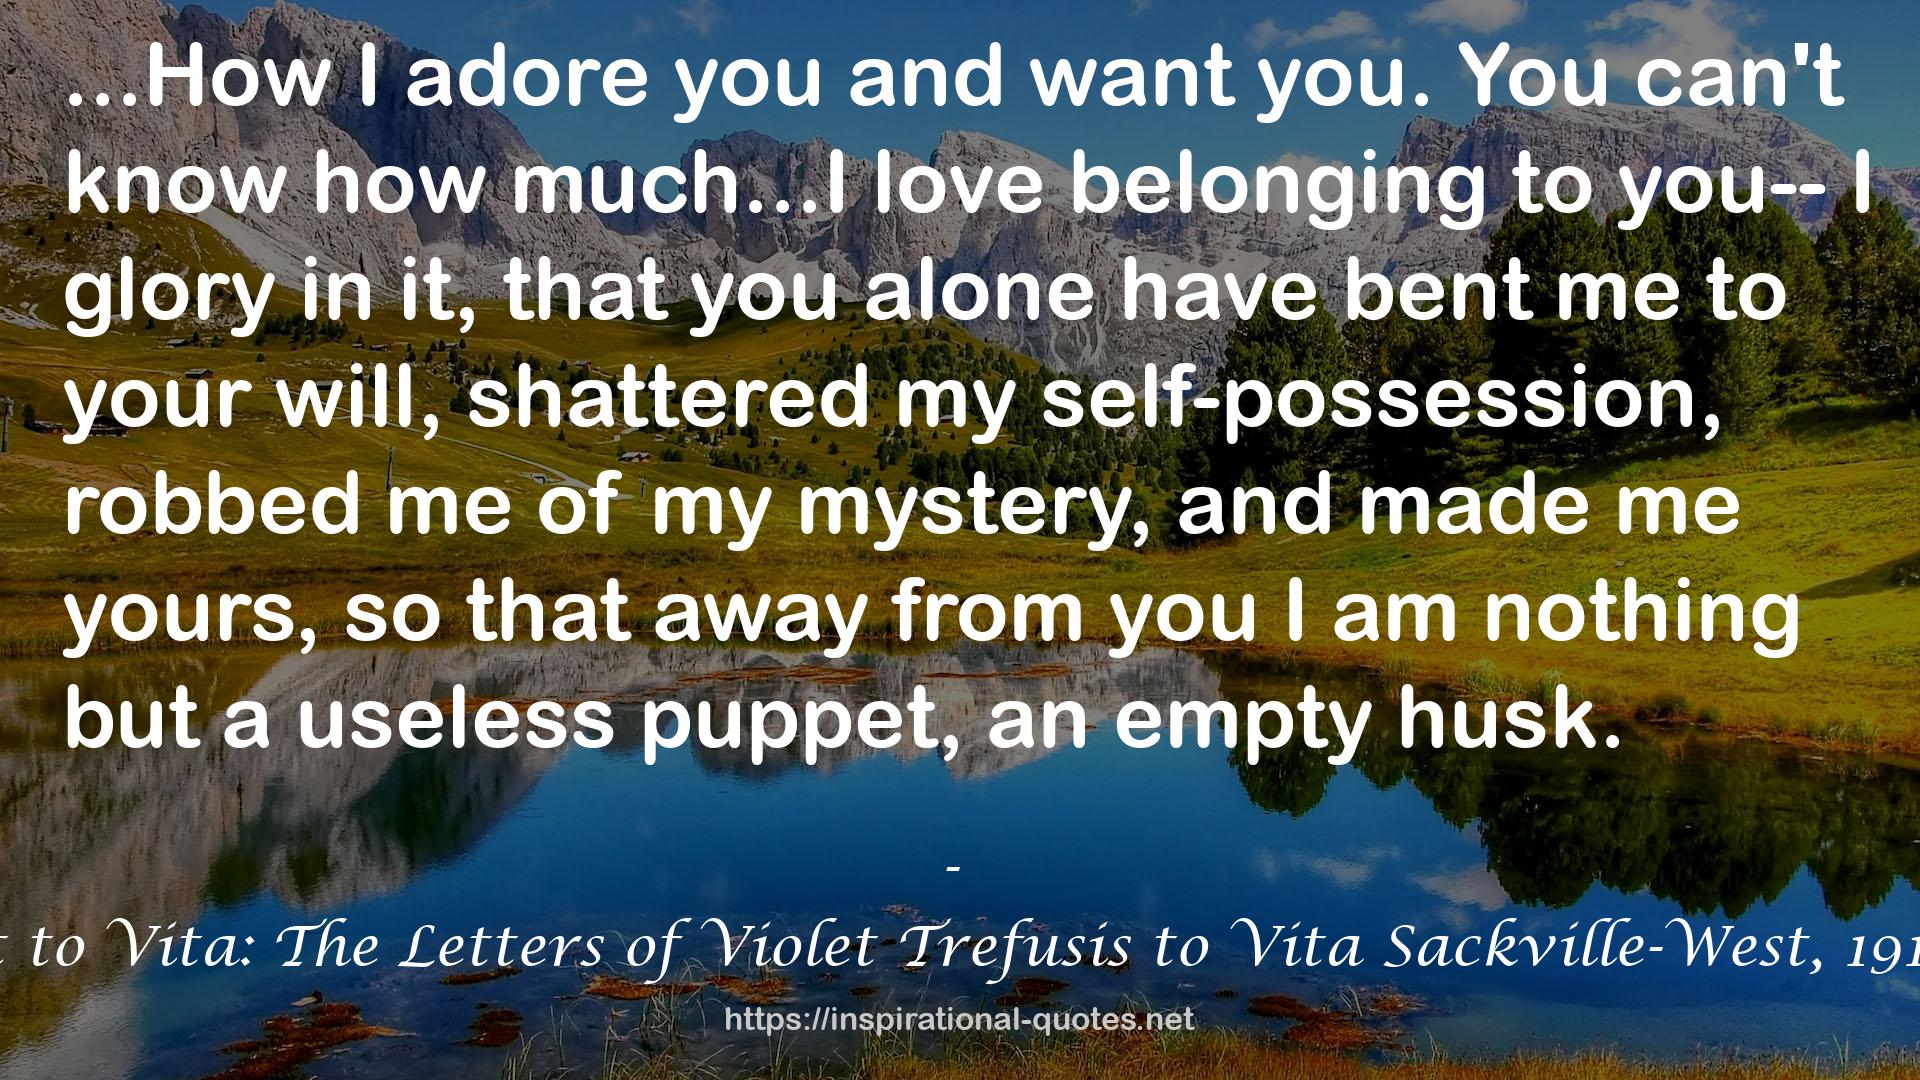 Violet to Vita: The Letters of Violet Trefusis to Vita Sackville-West, 1910-1921 QUOTES